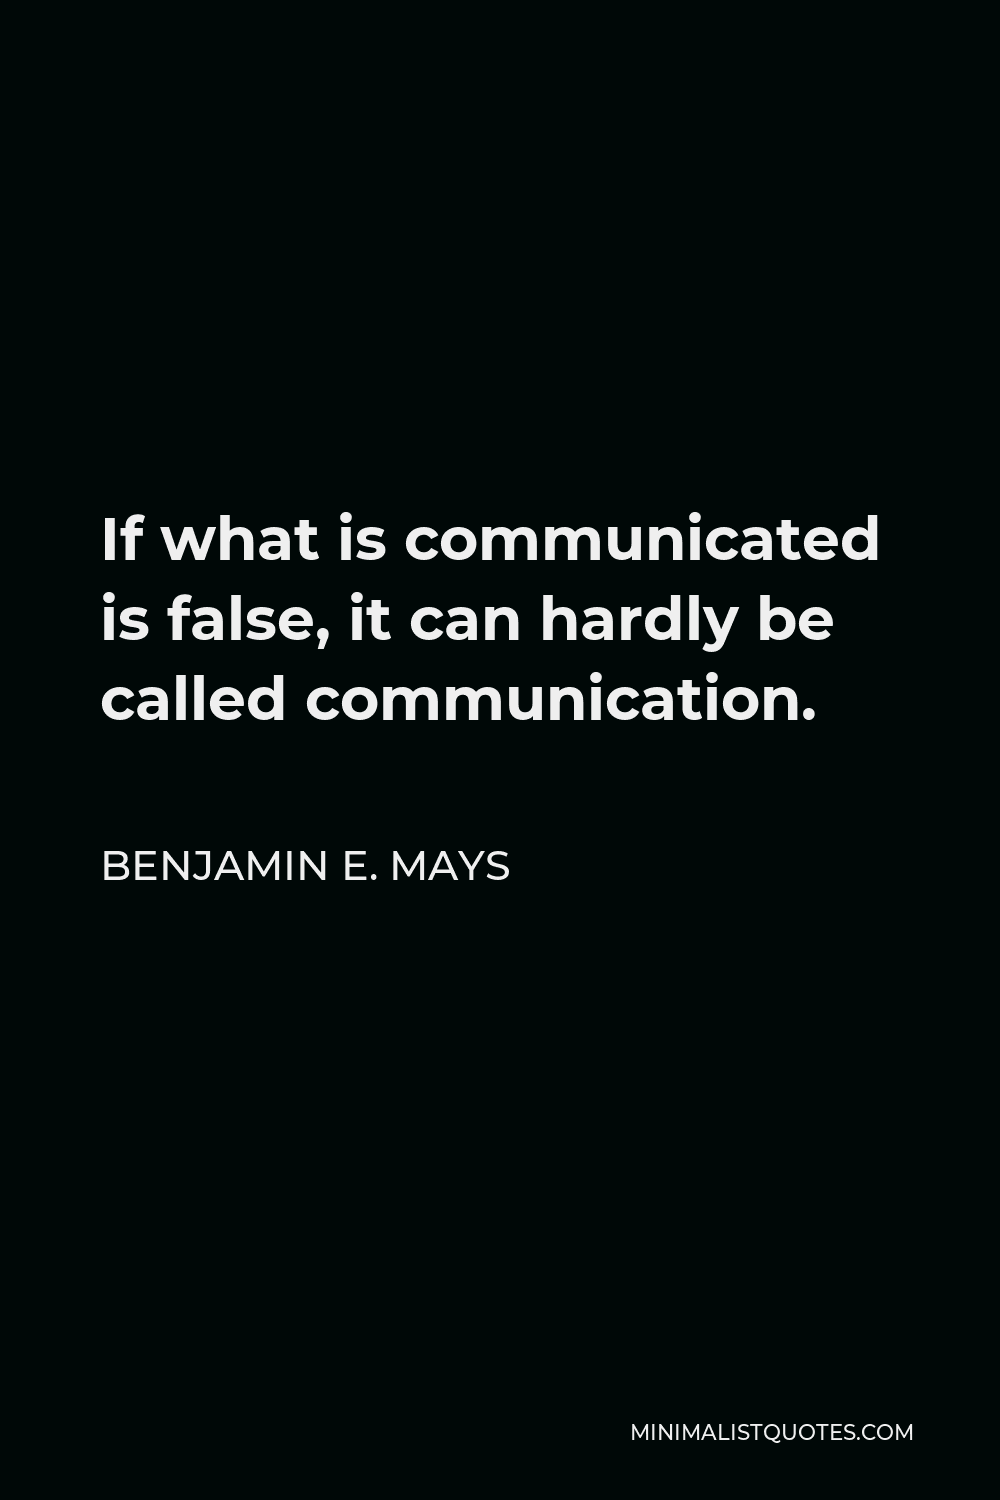 Benjamin E. Mays Quote - If what is communicated is false, it can hardly be called communication.